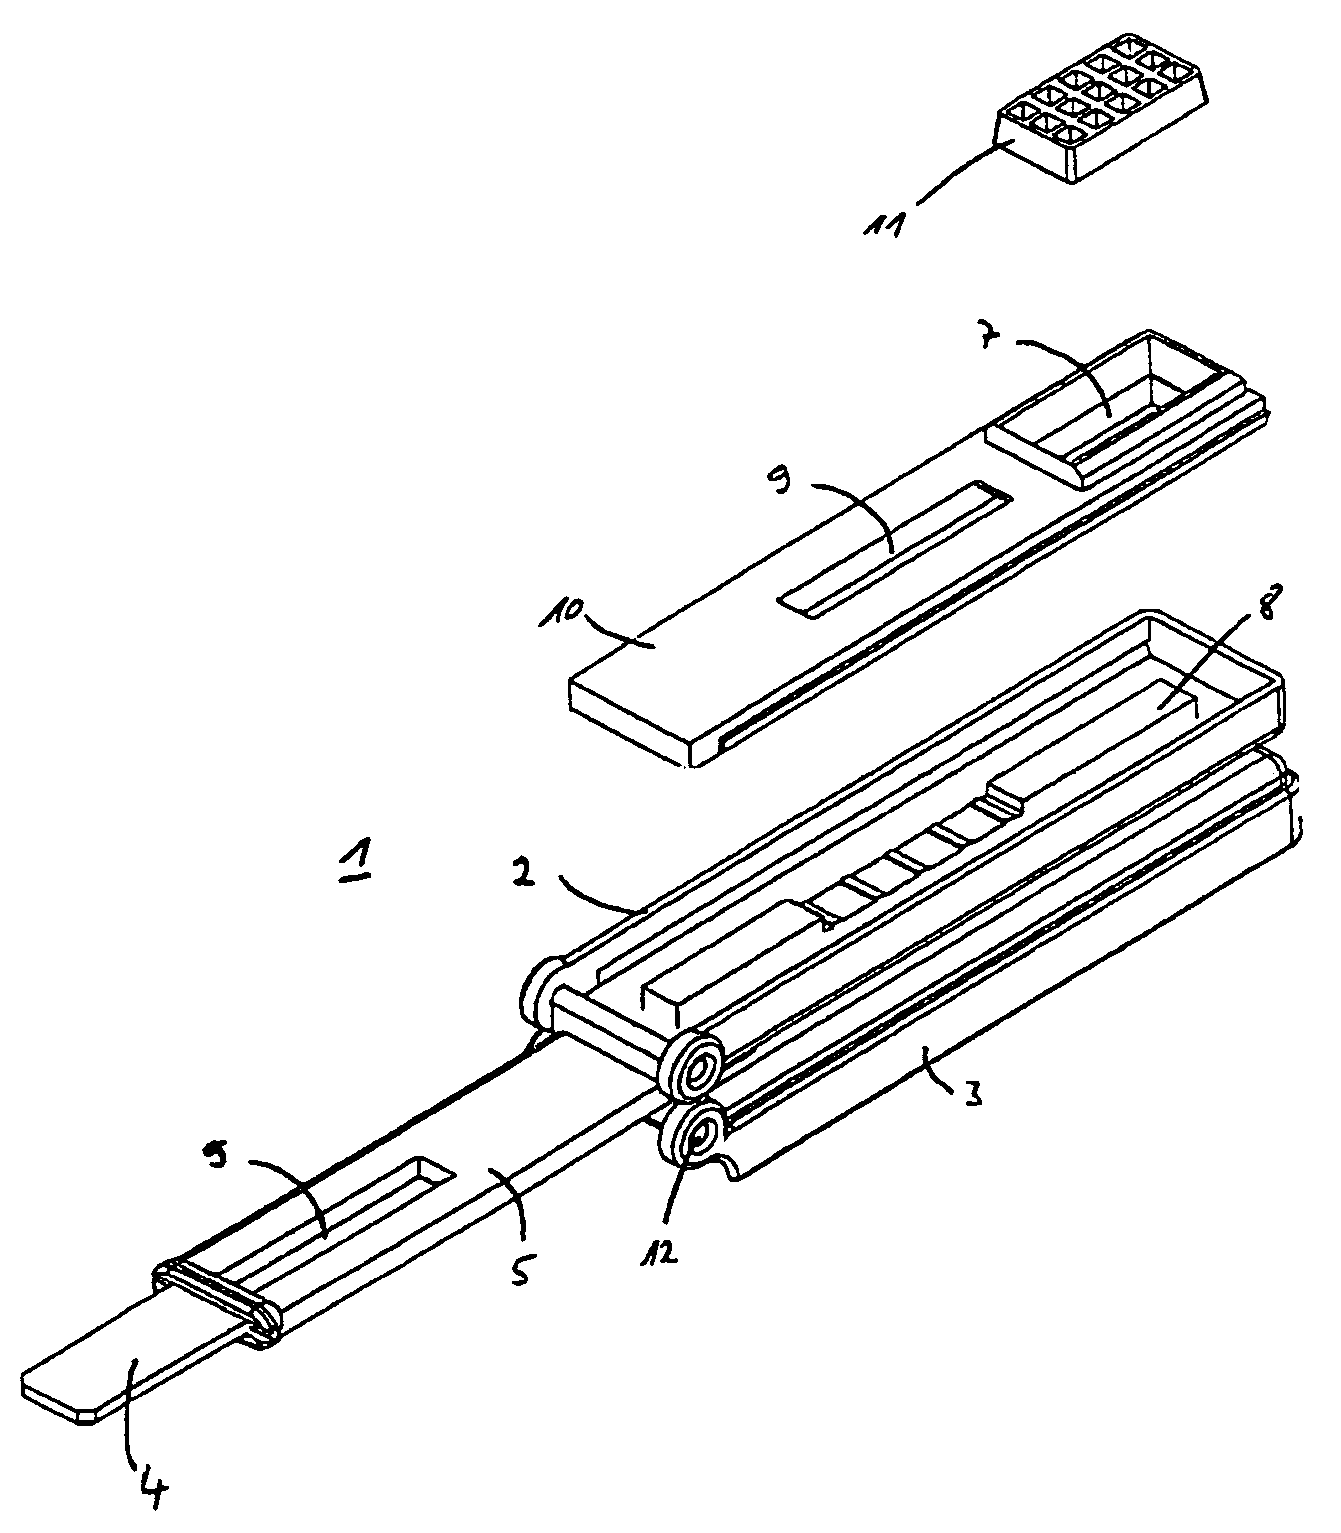 Device for collecting liquid samples